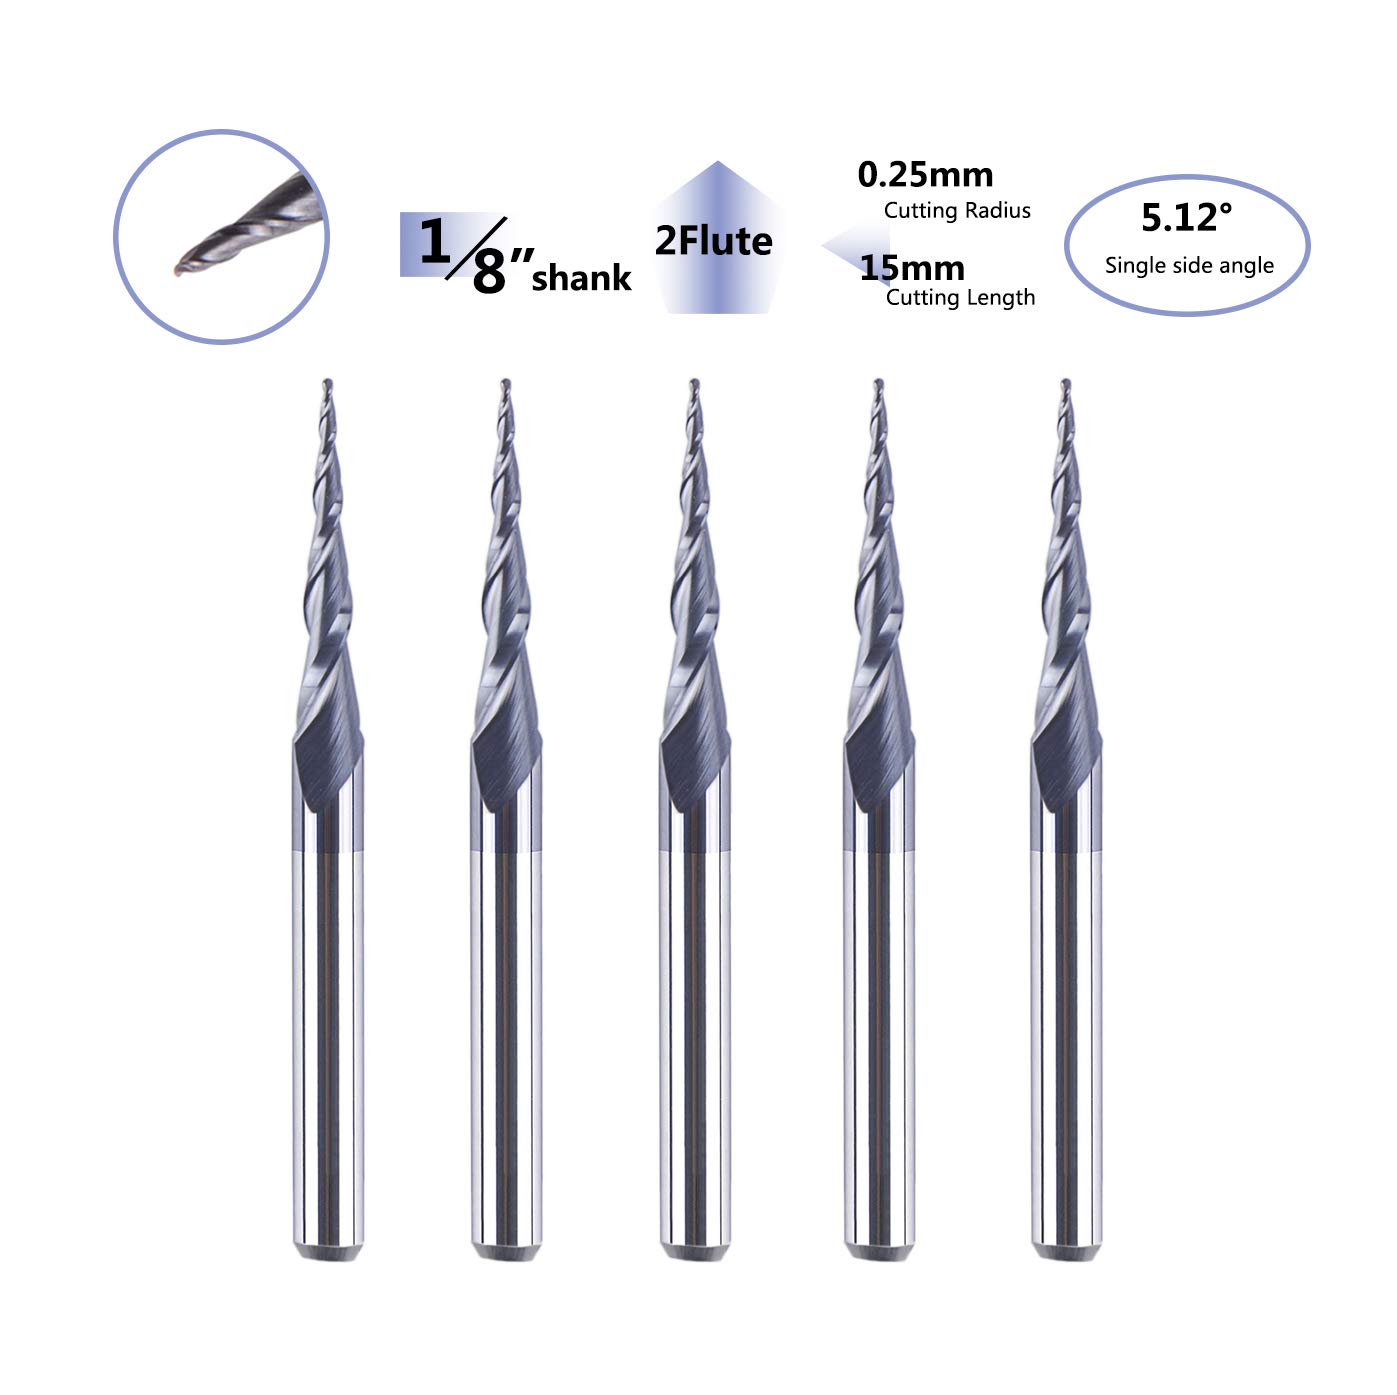 SpeTool 5Pc/Pack 1.0mm Cutting Radius(2.0mm Diameter) Tapered Ball Nose End Mill 1/8 Shank Radius with TiAlN Coated CNC Router Bit for 3D